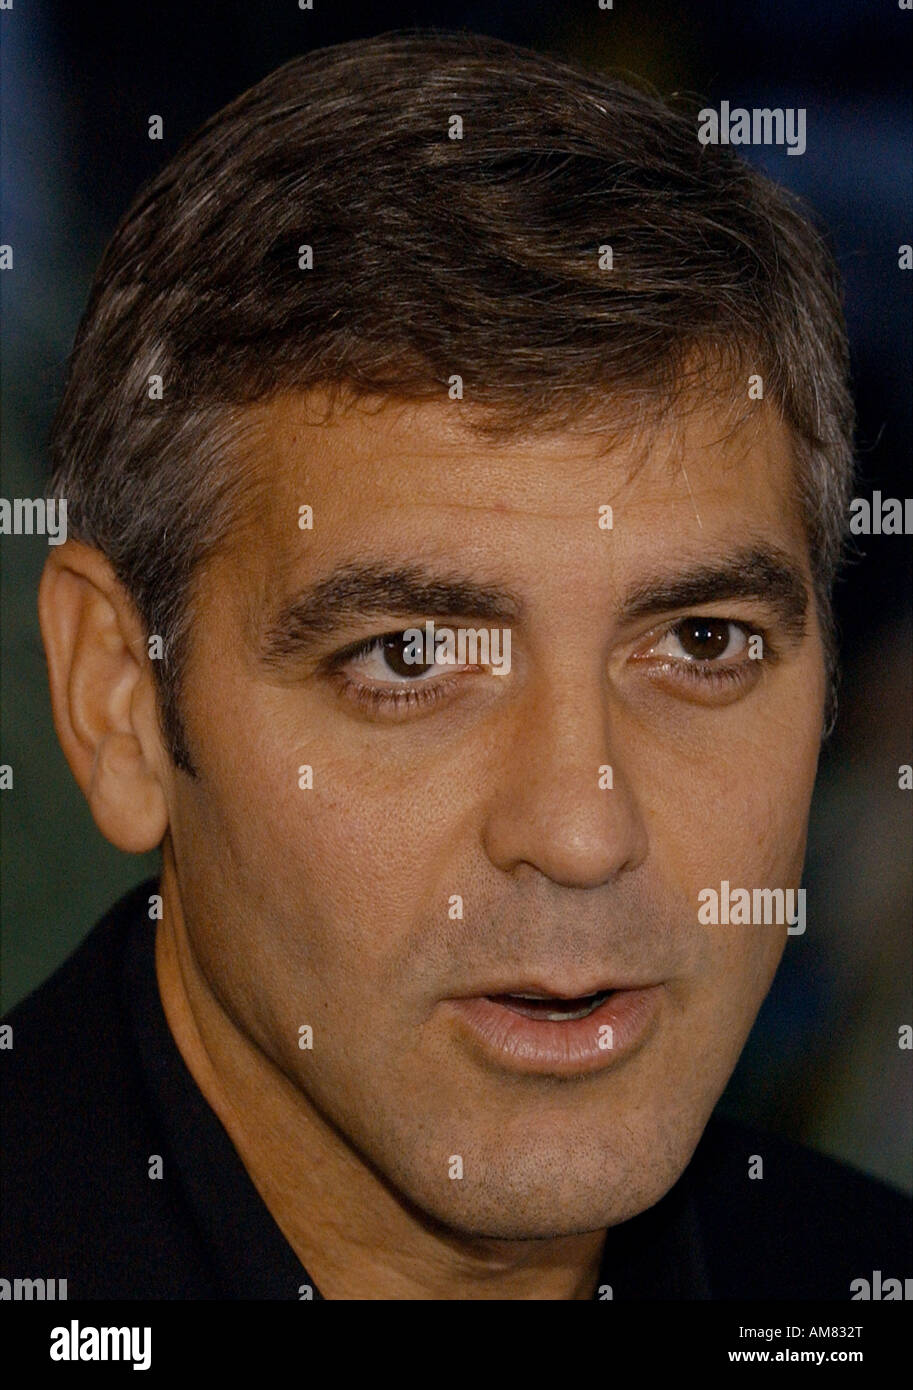 George Clooney Executive Producer new HBO series K Street arrives at The Palm for an HBO party on Washington K Street goes insid Stock Photo